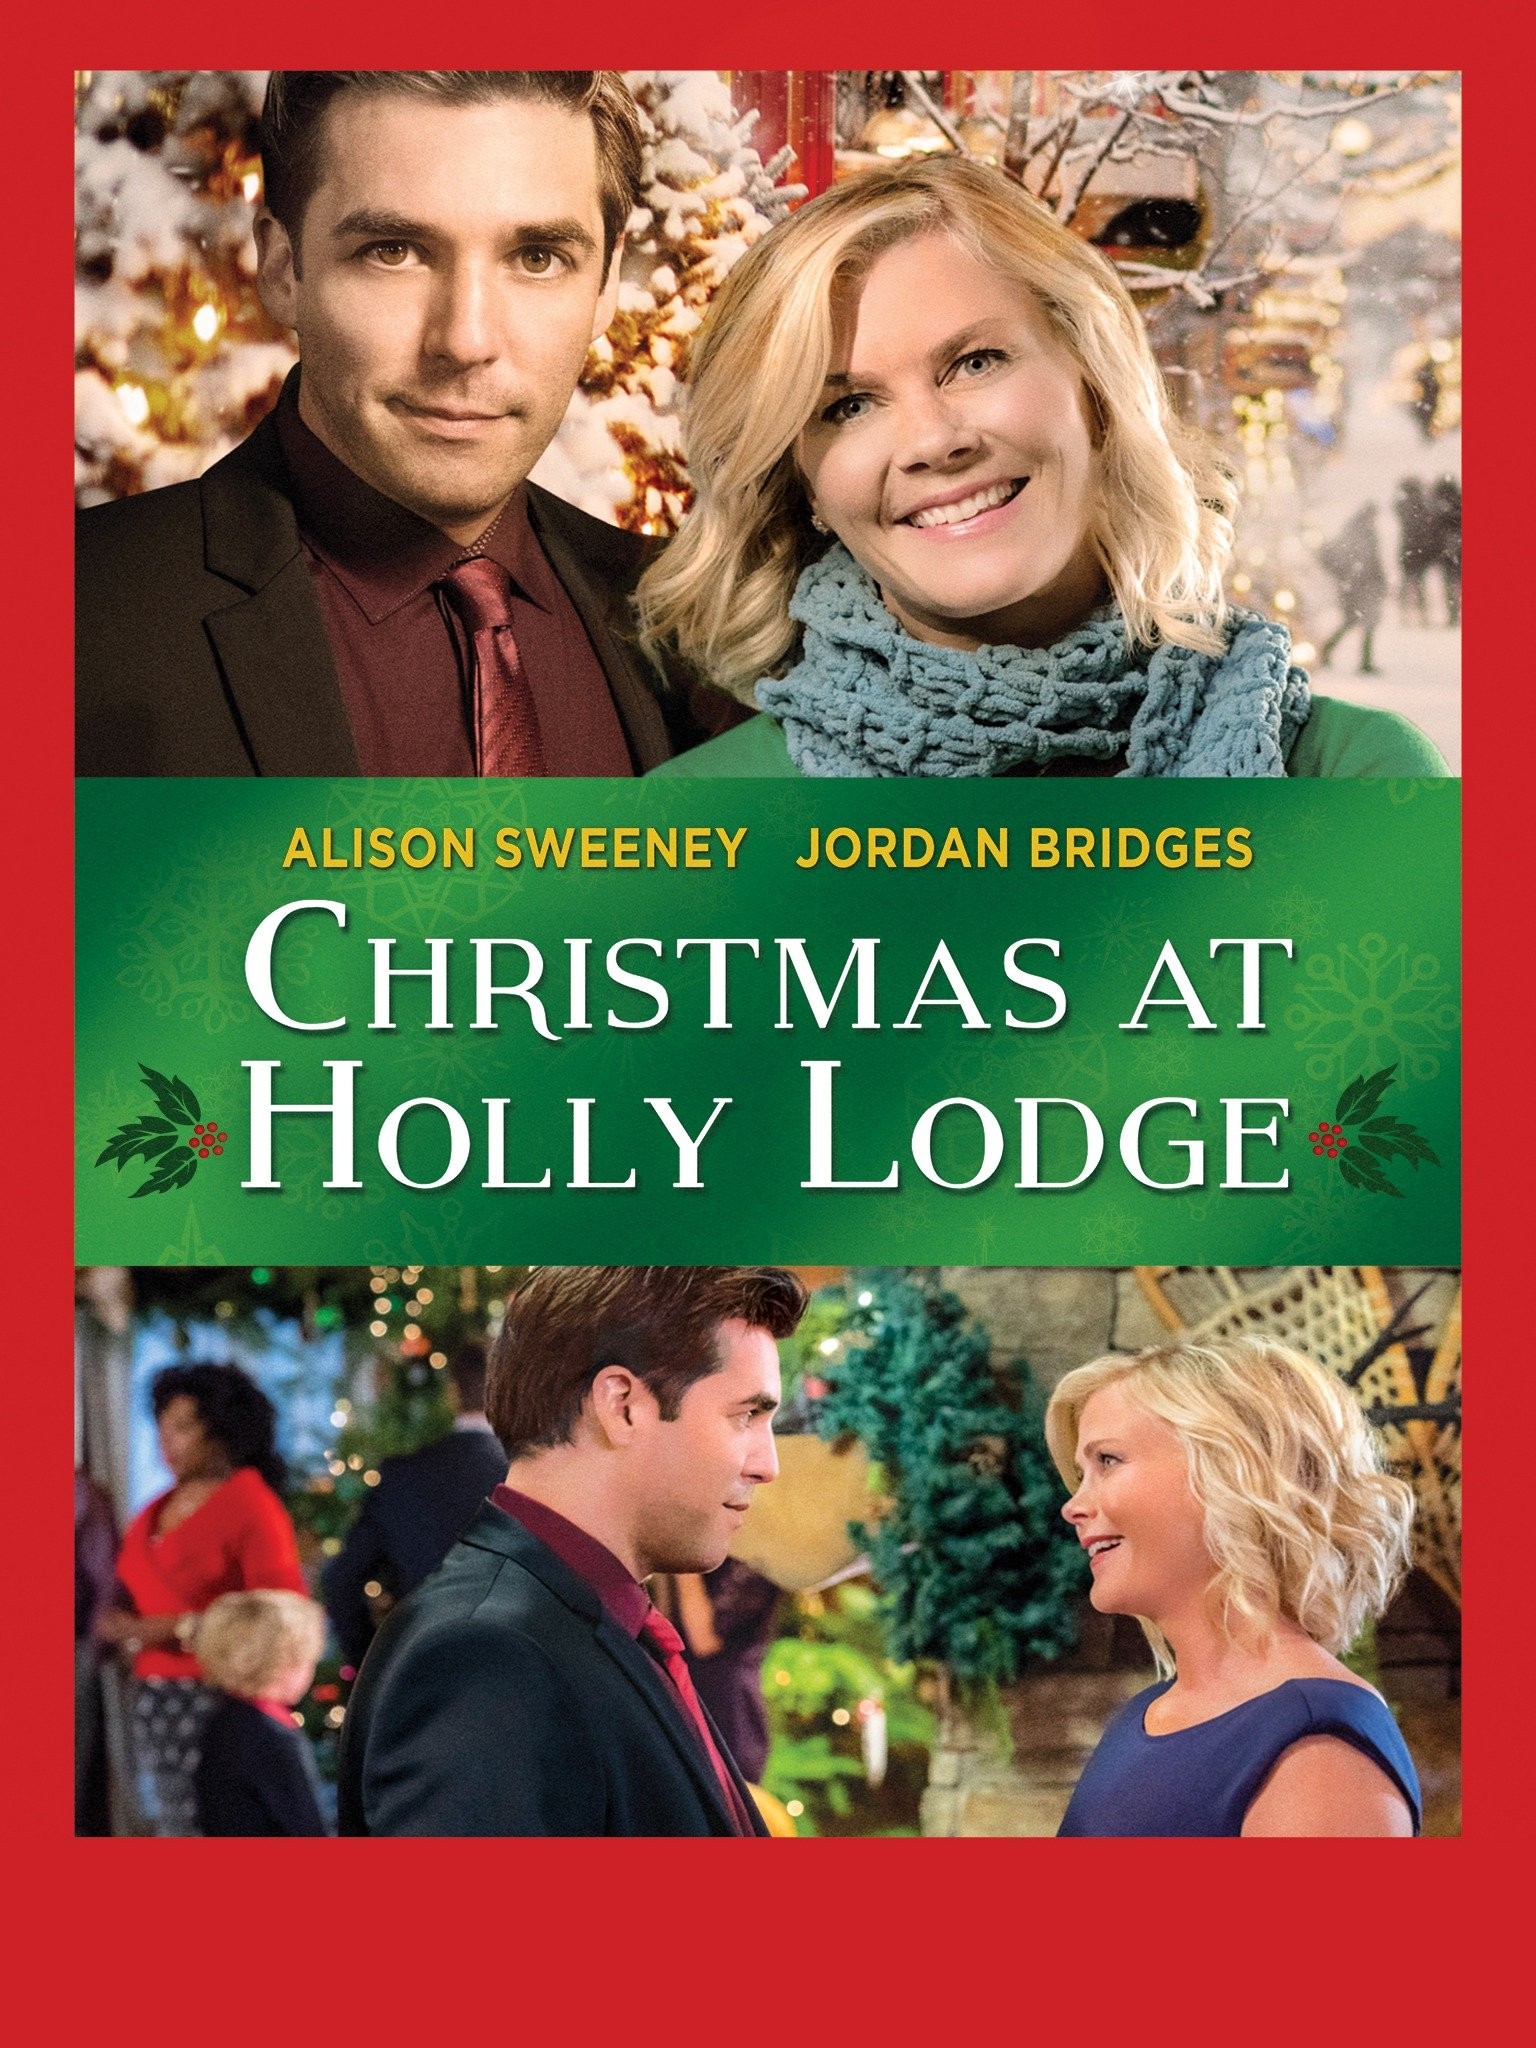 The Christmas Lodge – Review